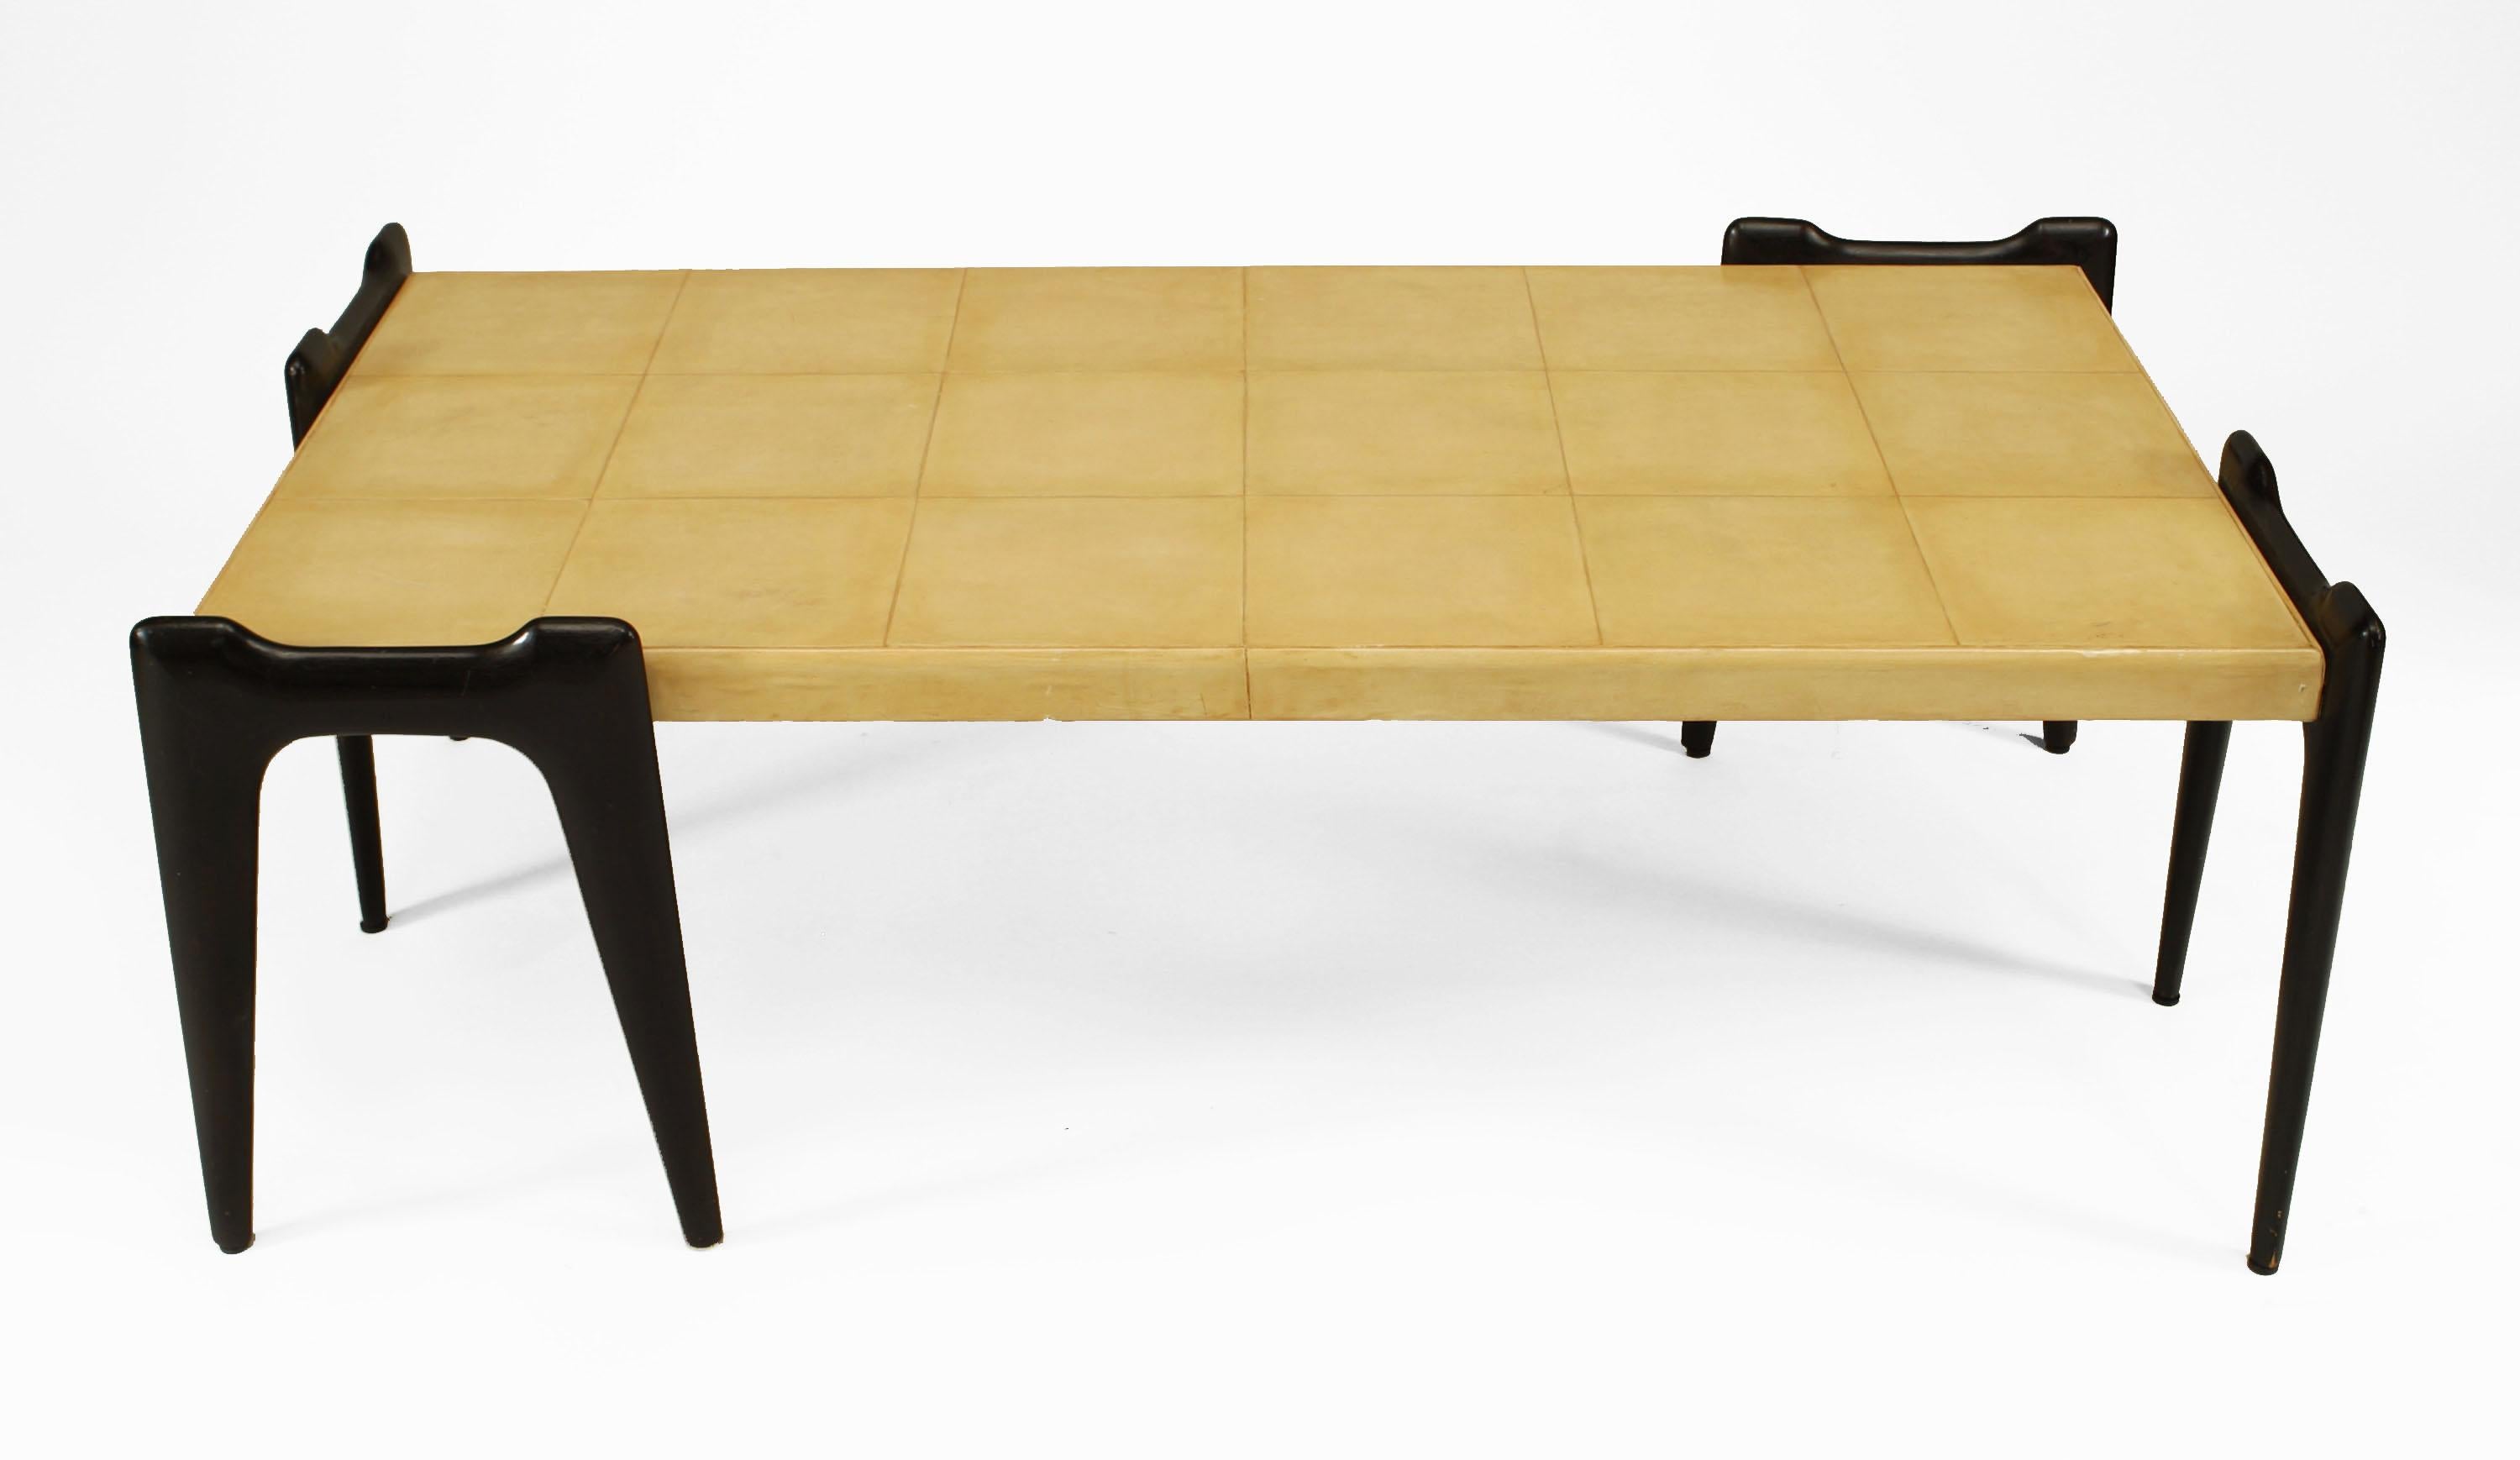 Attributed to Ico Parisi and crafted in Italy in the 1940's, this rectangular coffee table is distinguished by its parchment veneer finish applied in rows of 3